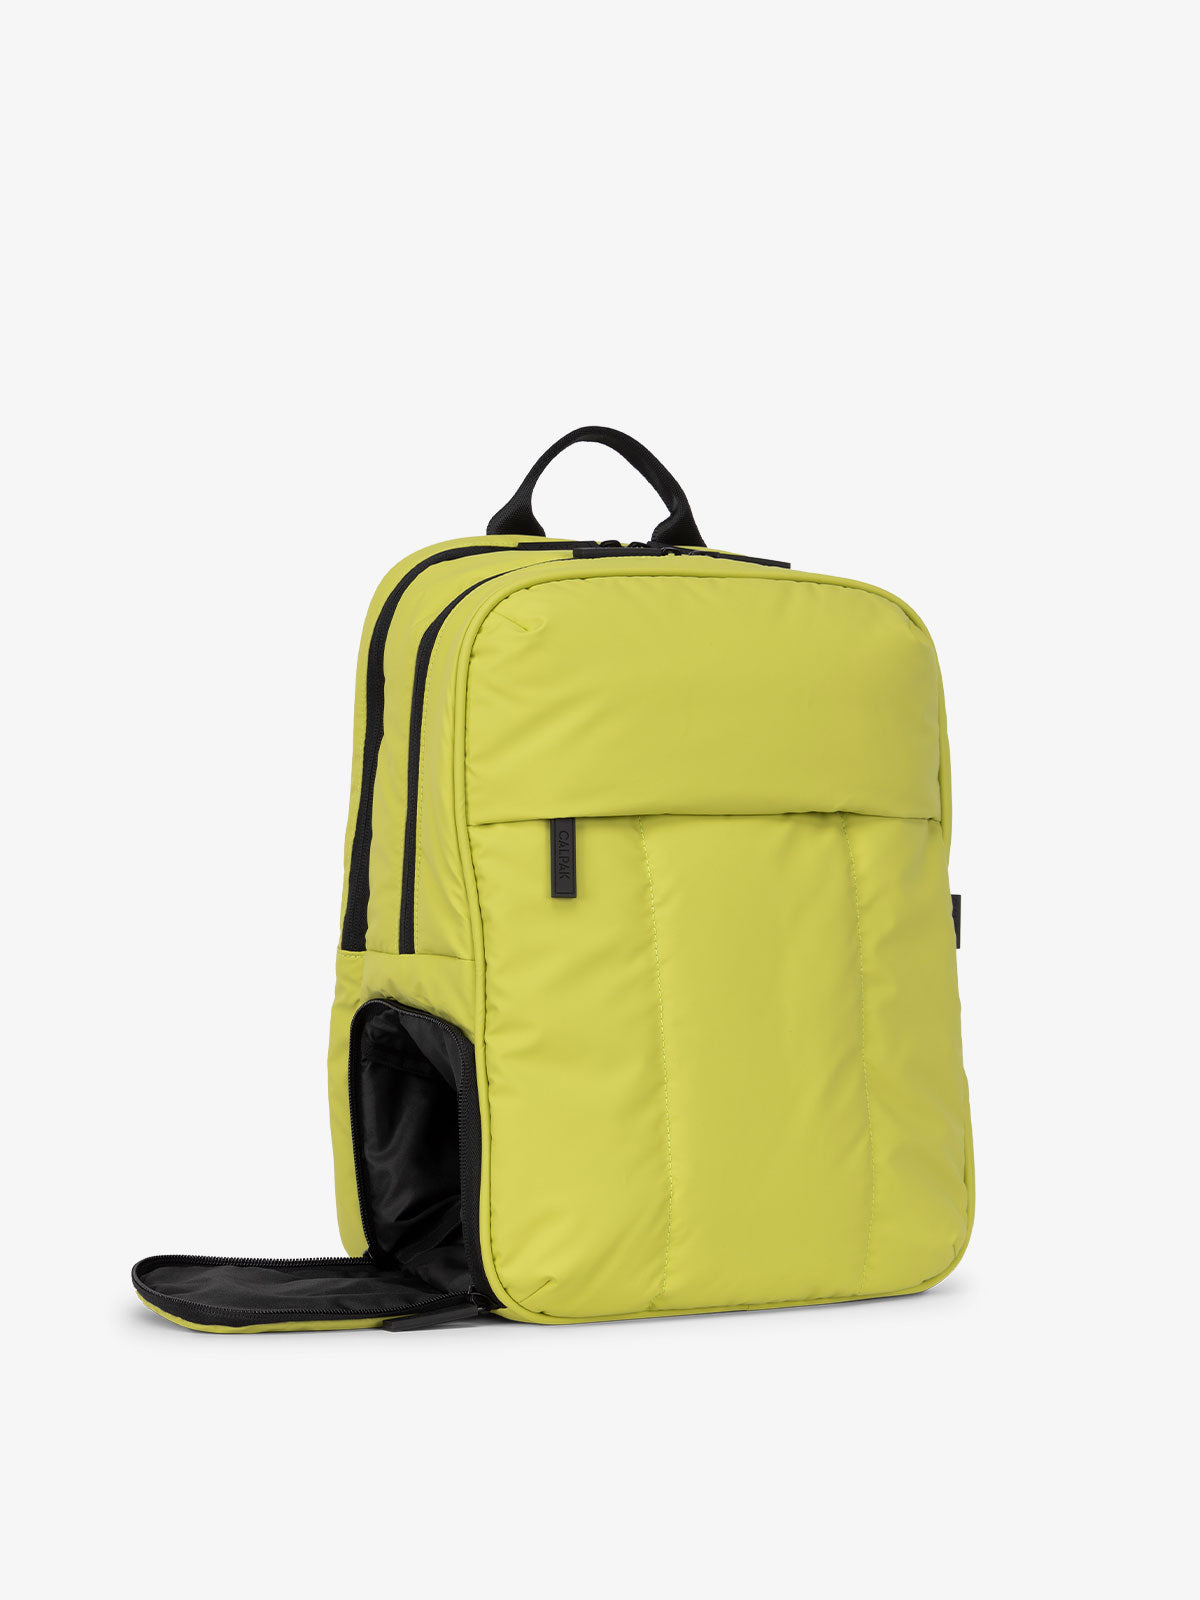 shoe compartment for Luka laptop backpack in celery green